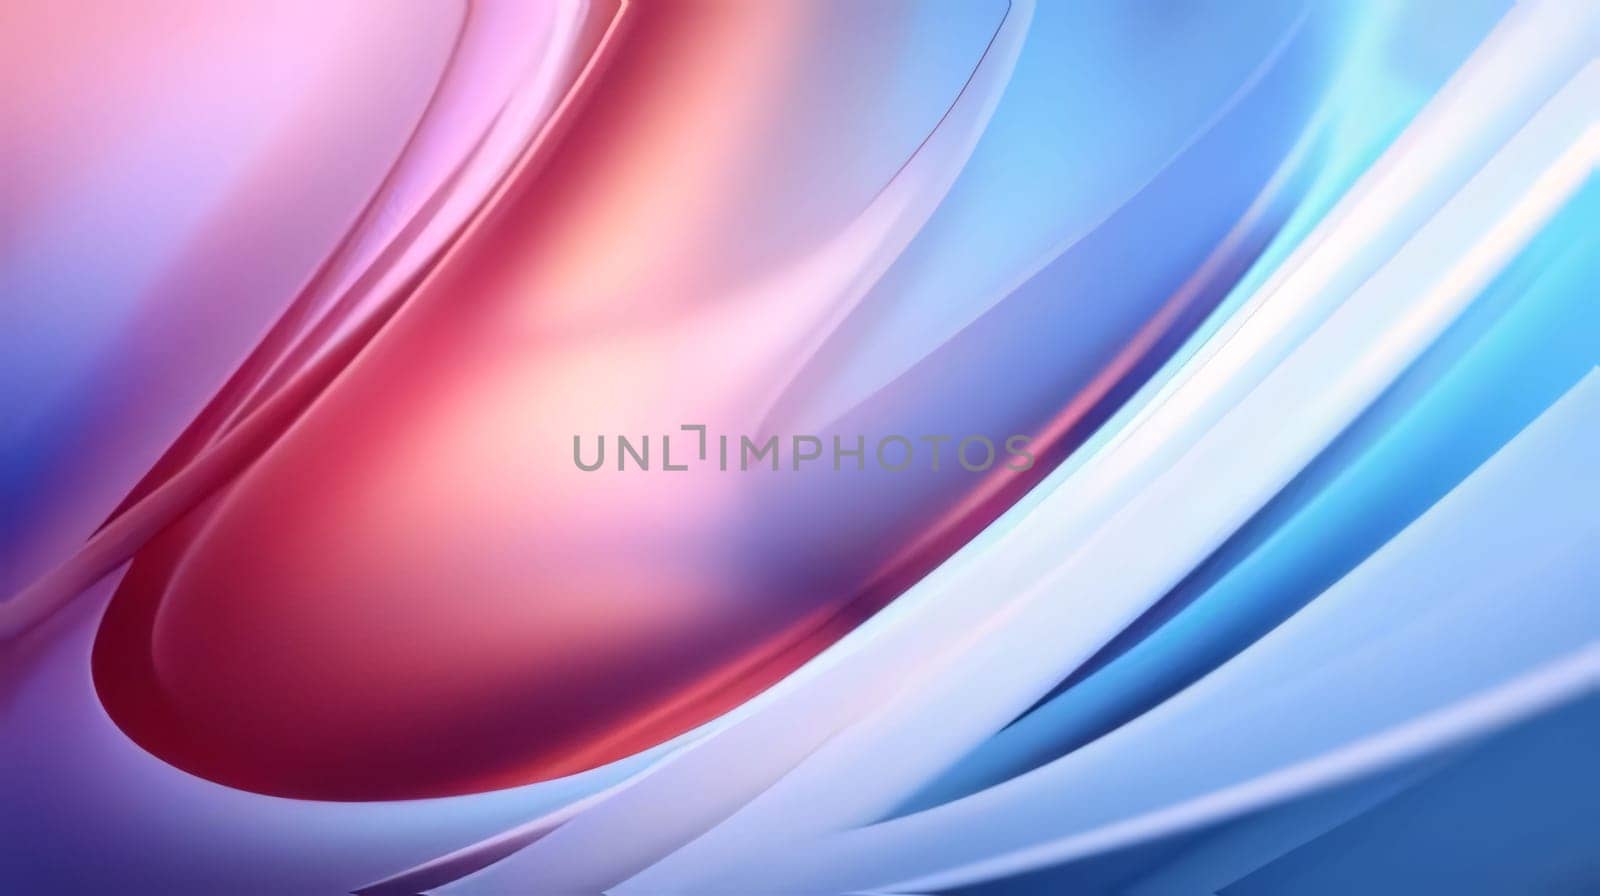 Abstract background design: abstract background with smooth lines in blue, purple and pink colors